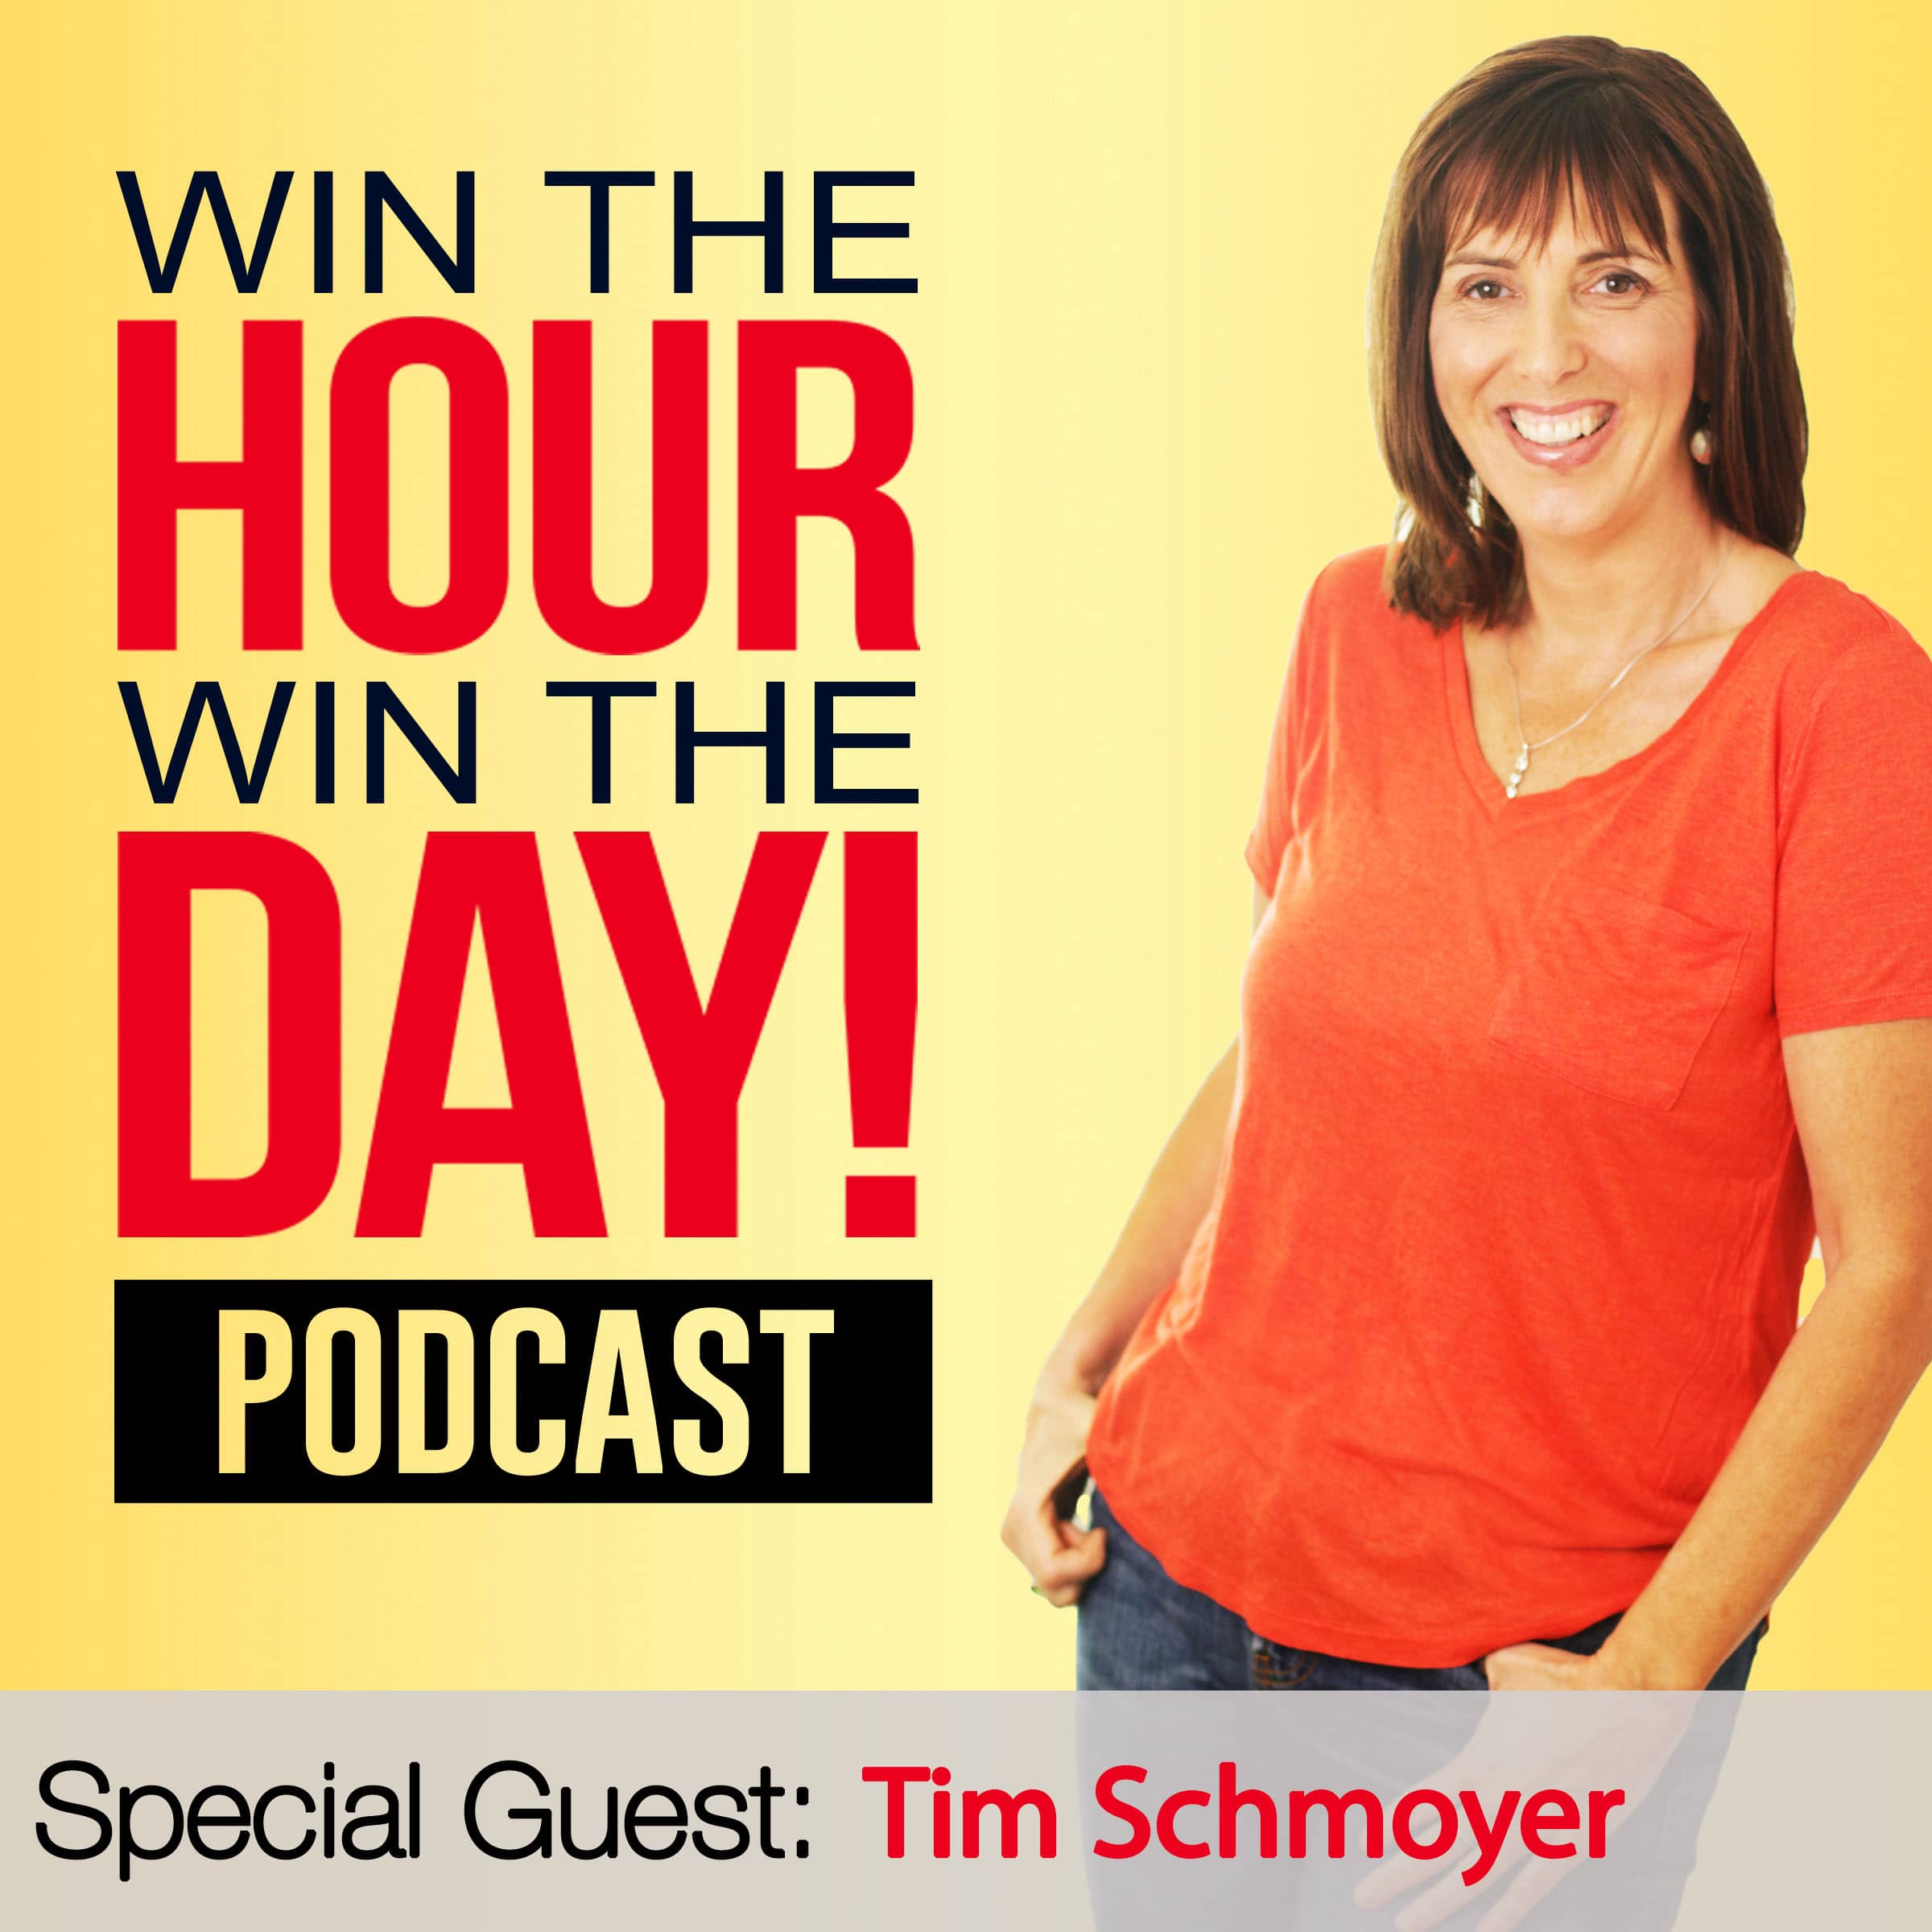 The Secrets To Reaching Your Audience On Youtube! With Tim Schmoyer